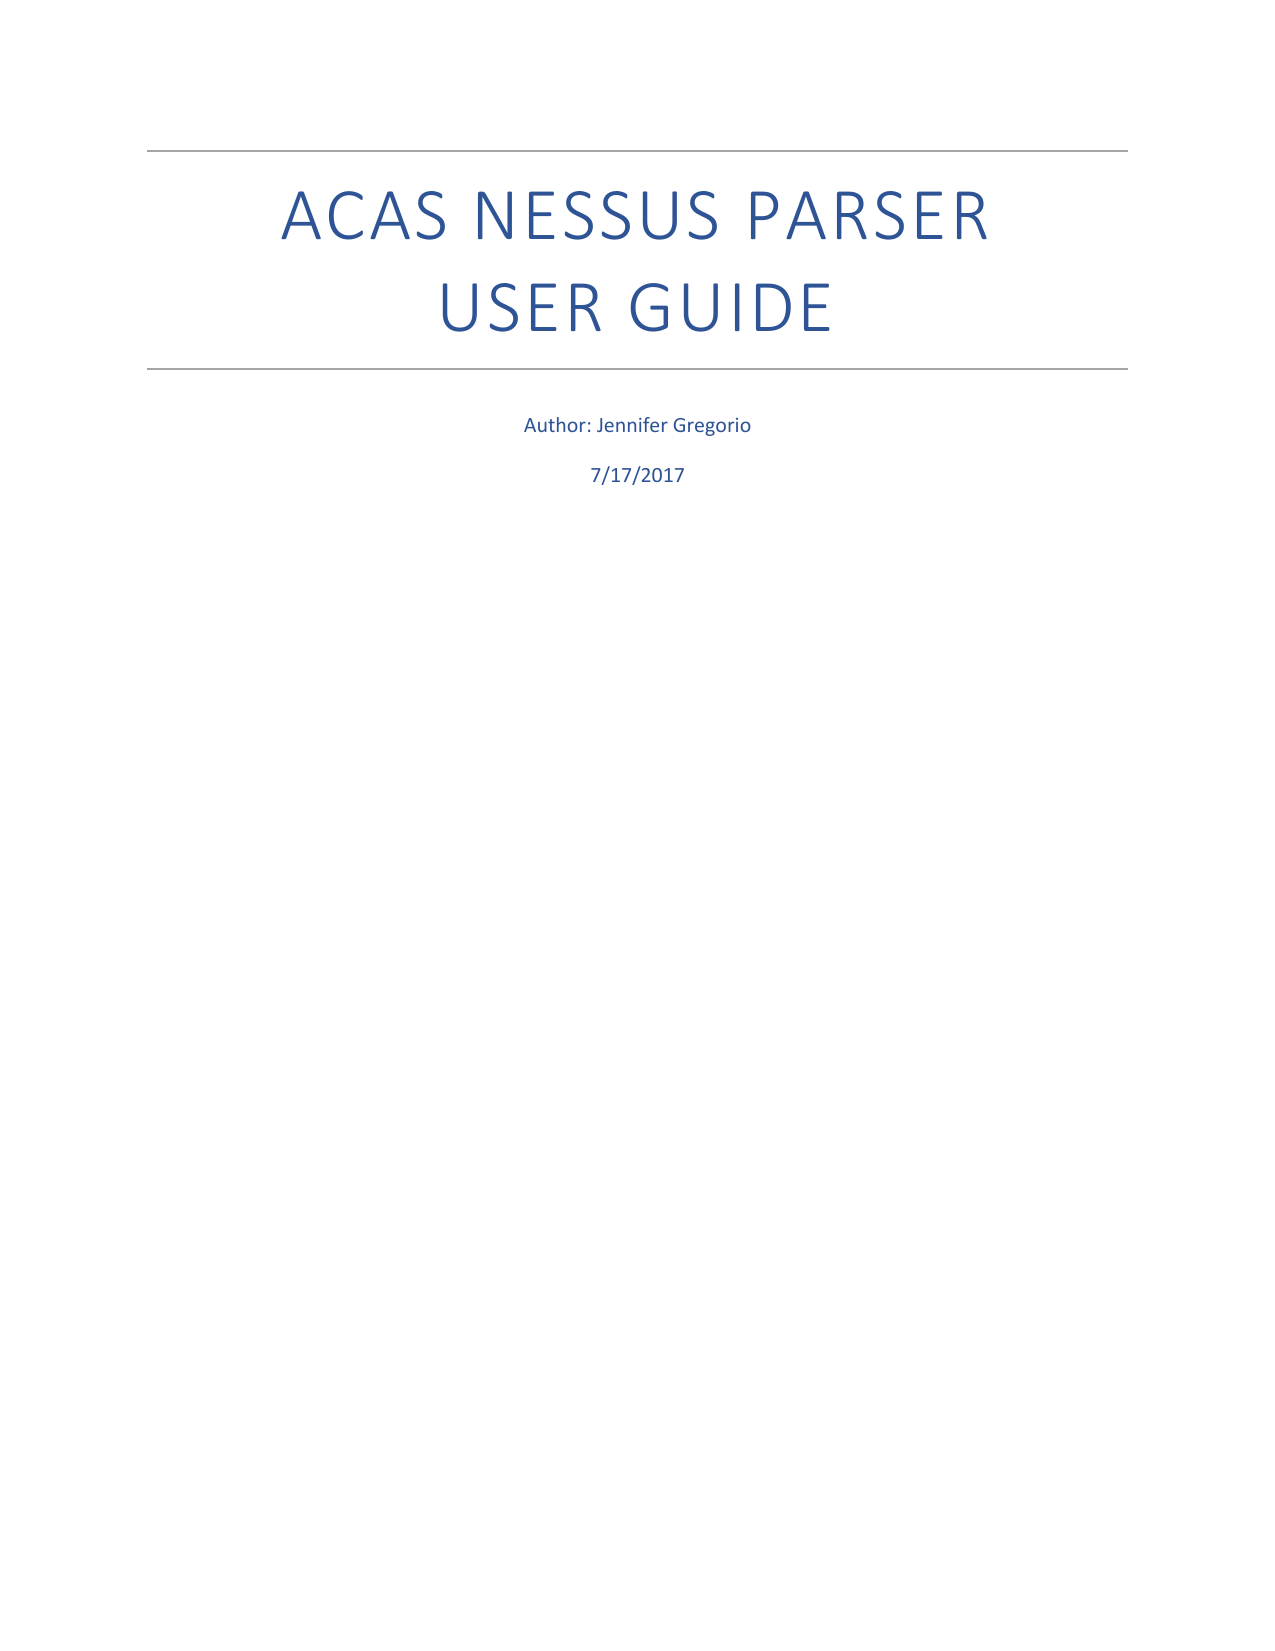 Page 1 of 8 - ACAS Nessus Parser User Guide